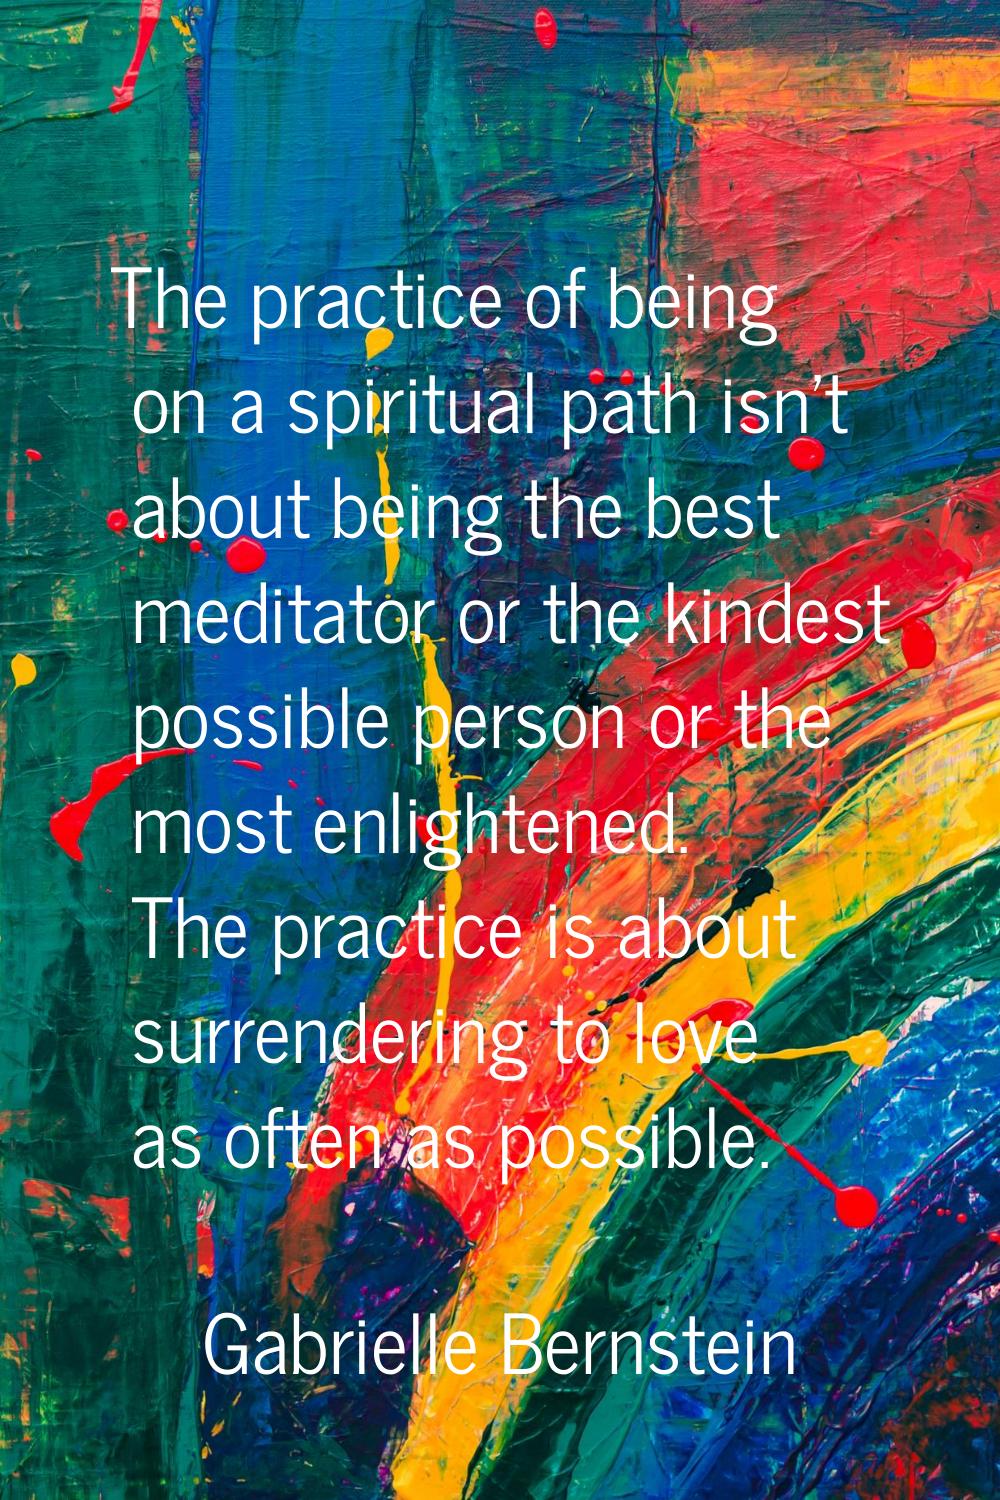 The practice of being on a spiritual path isn't about being the best meditator or the kindest possi